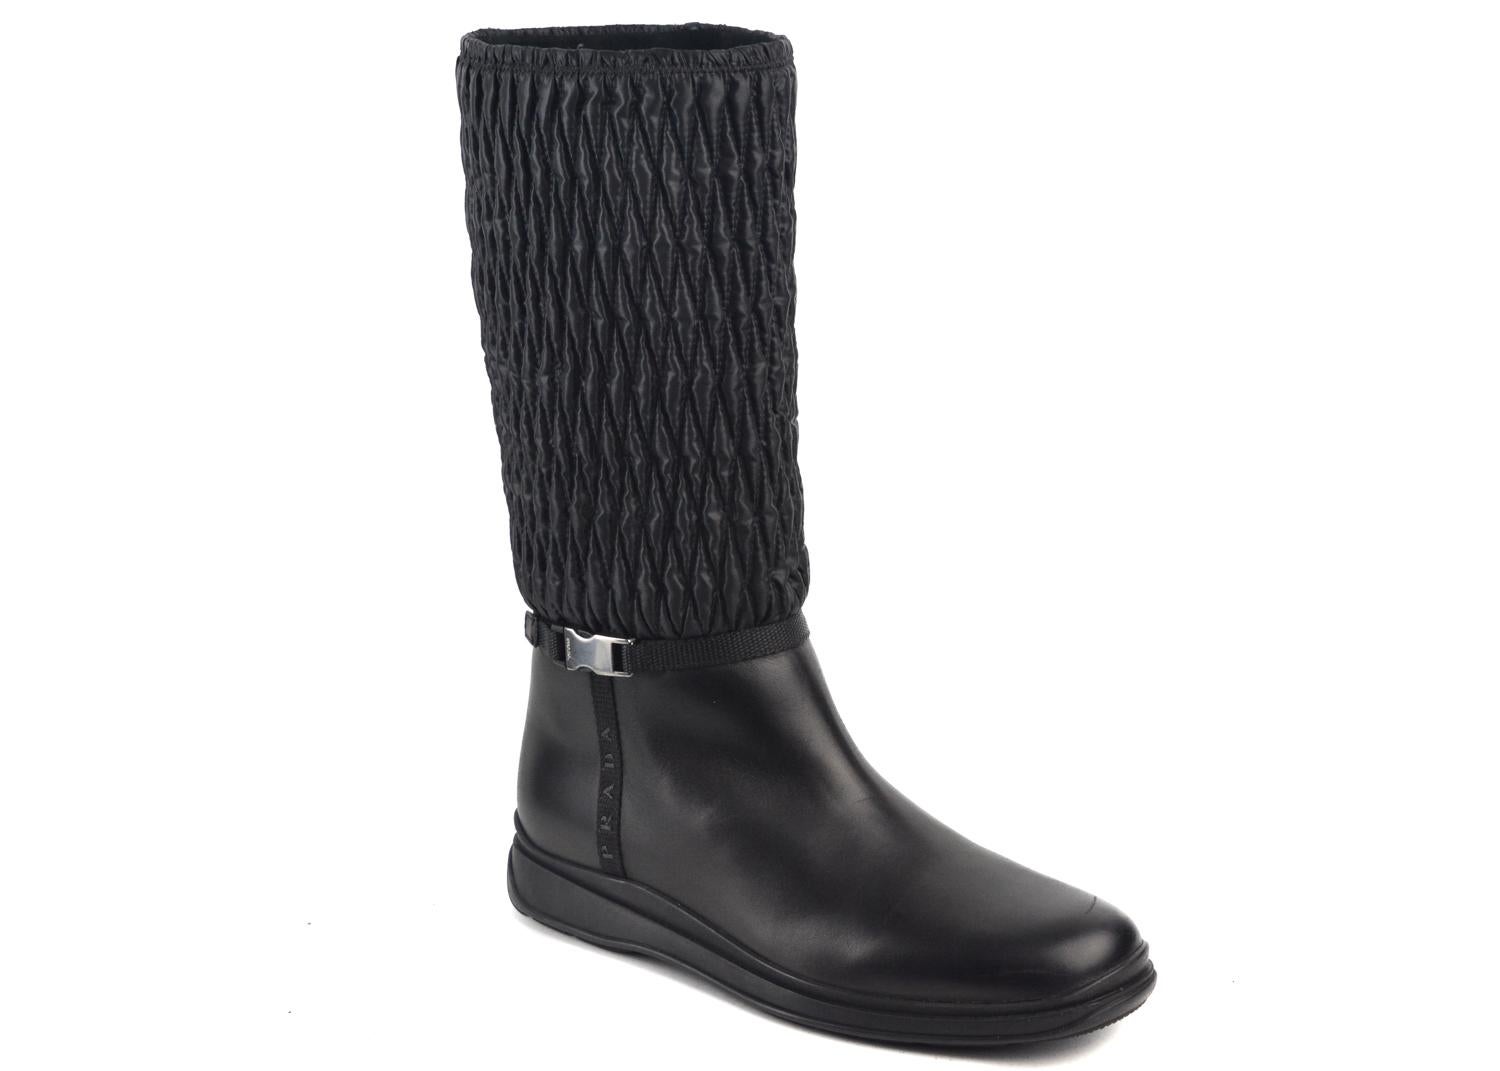 The comfort which this winter boots can provide along with the style is matchless.The Prada Sport leather and nylon snow boots in black is truly marvelous. The cuff is quilted and is as high as the knee, but slightly below the knee. The cuff lining